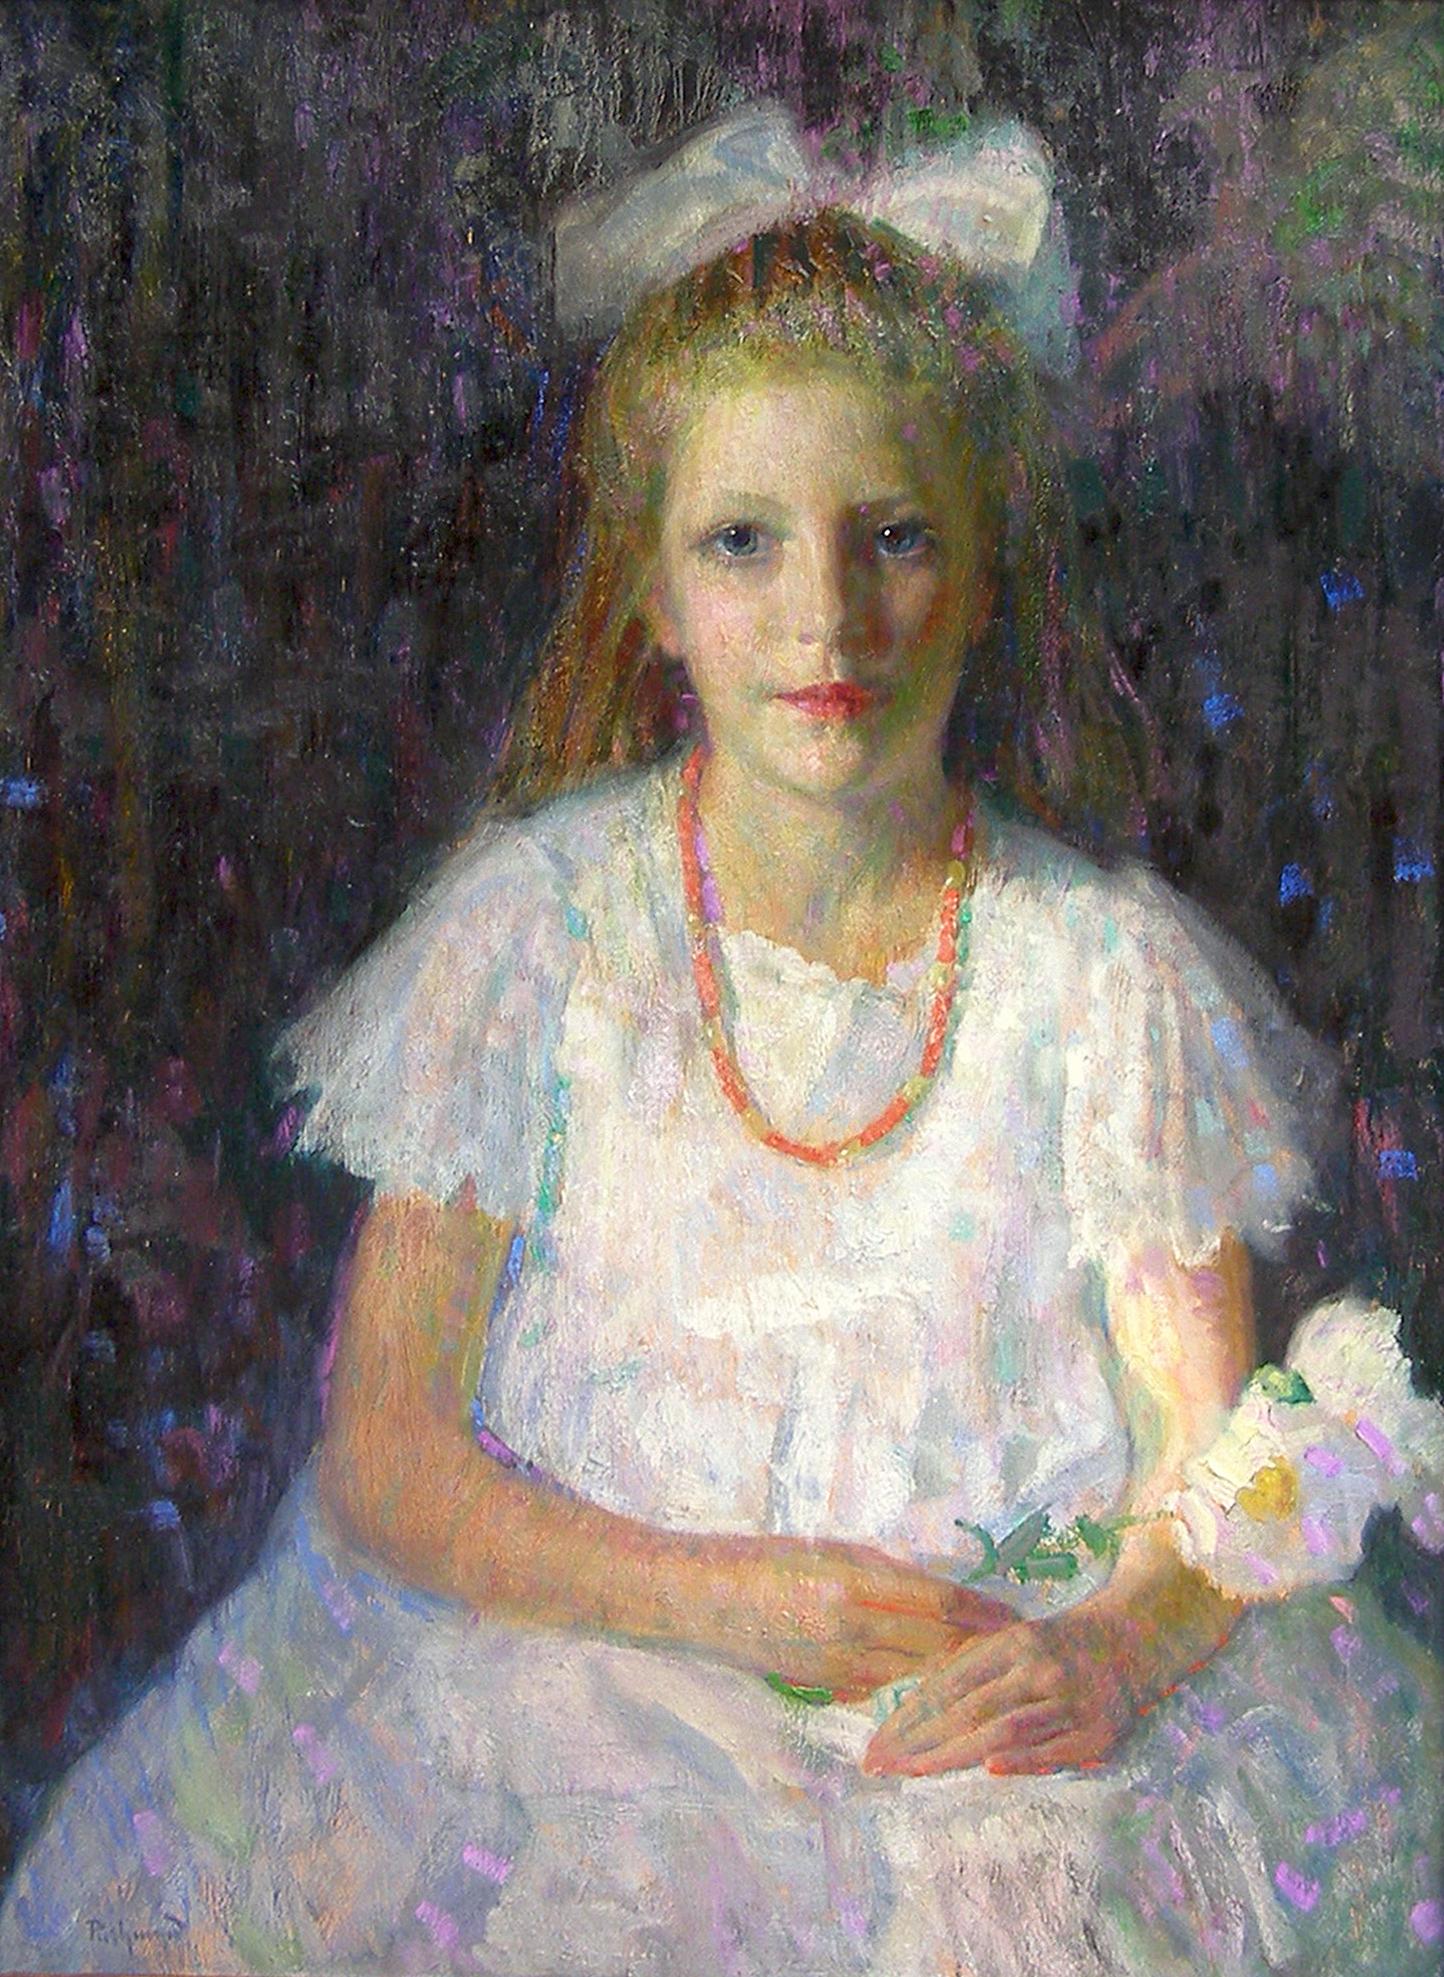 Marguerite, Young Gril with Flower Impressionist work - Painting by Hovsep Pushman